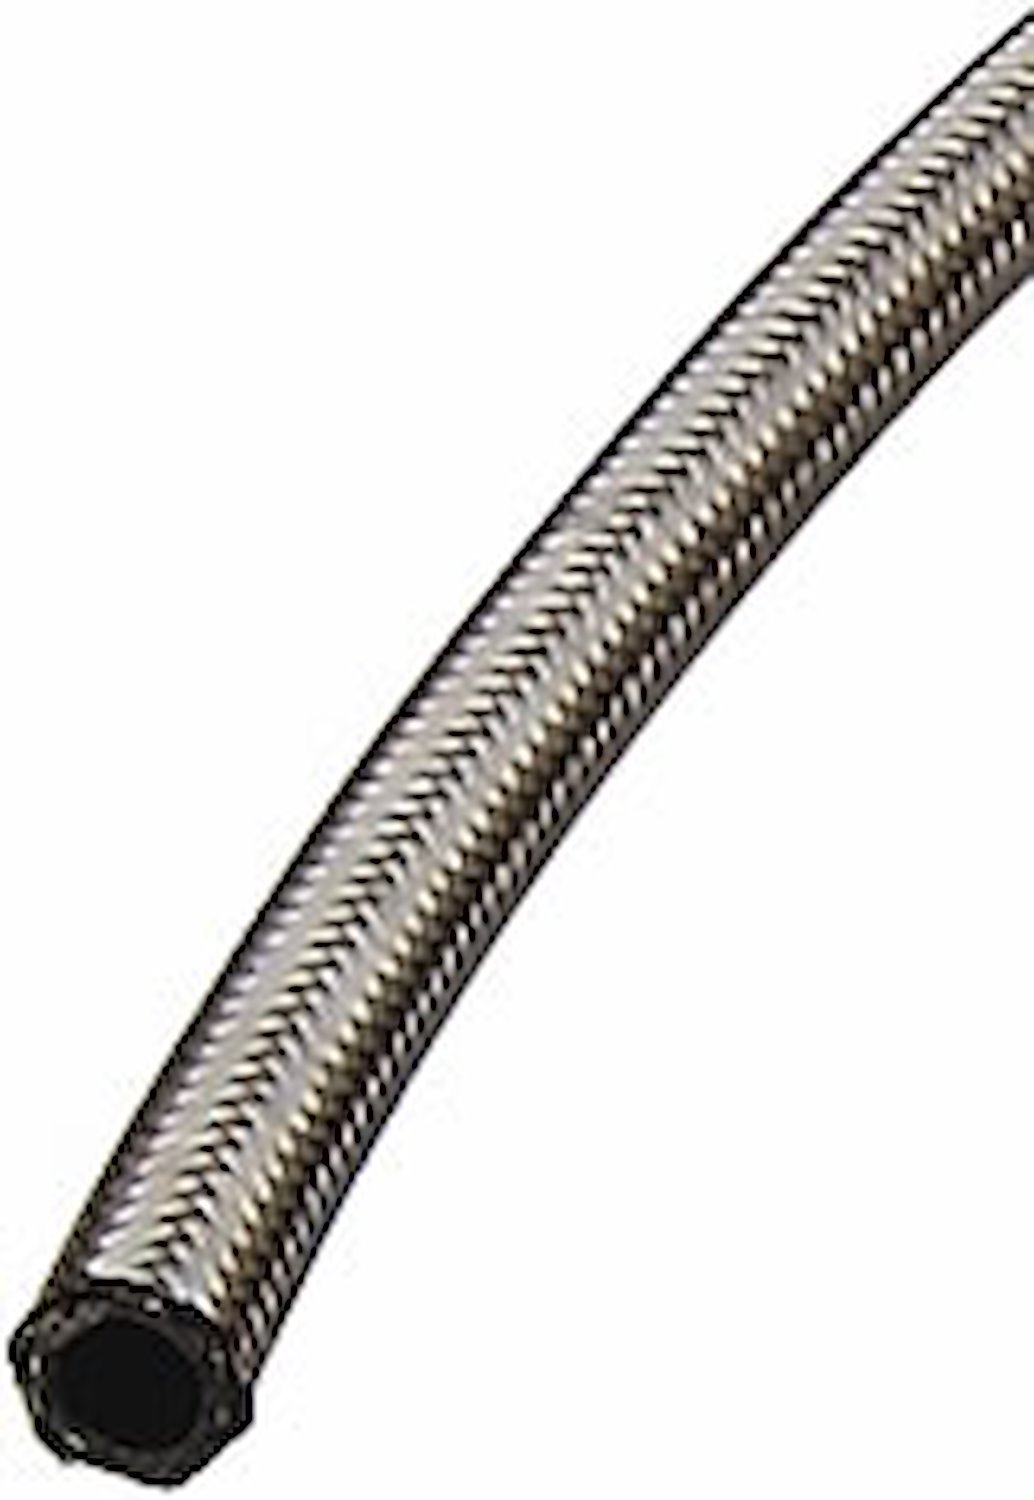 Pro-Flo 200 Series Stainless Steel Braided Hose -08 AN [3 ft.]